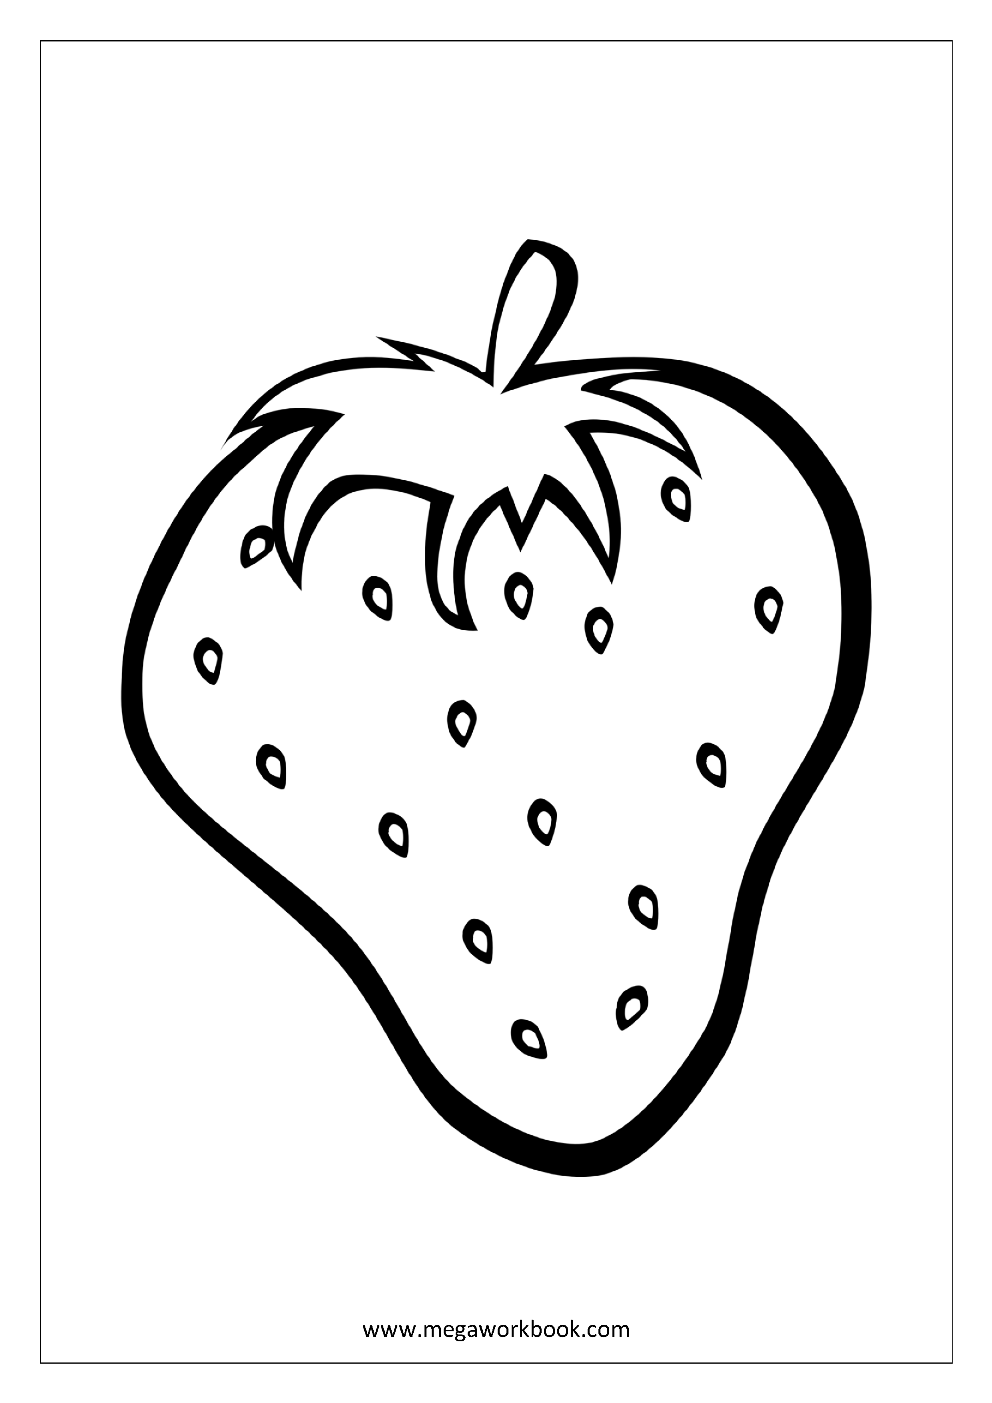 fruit coloring pages vegetable coloring pages food coloring pages free printables megaworkbook